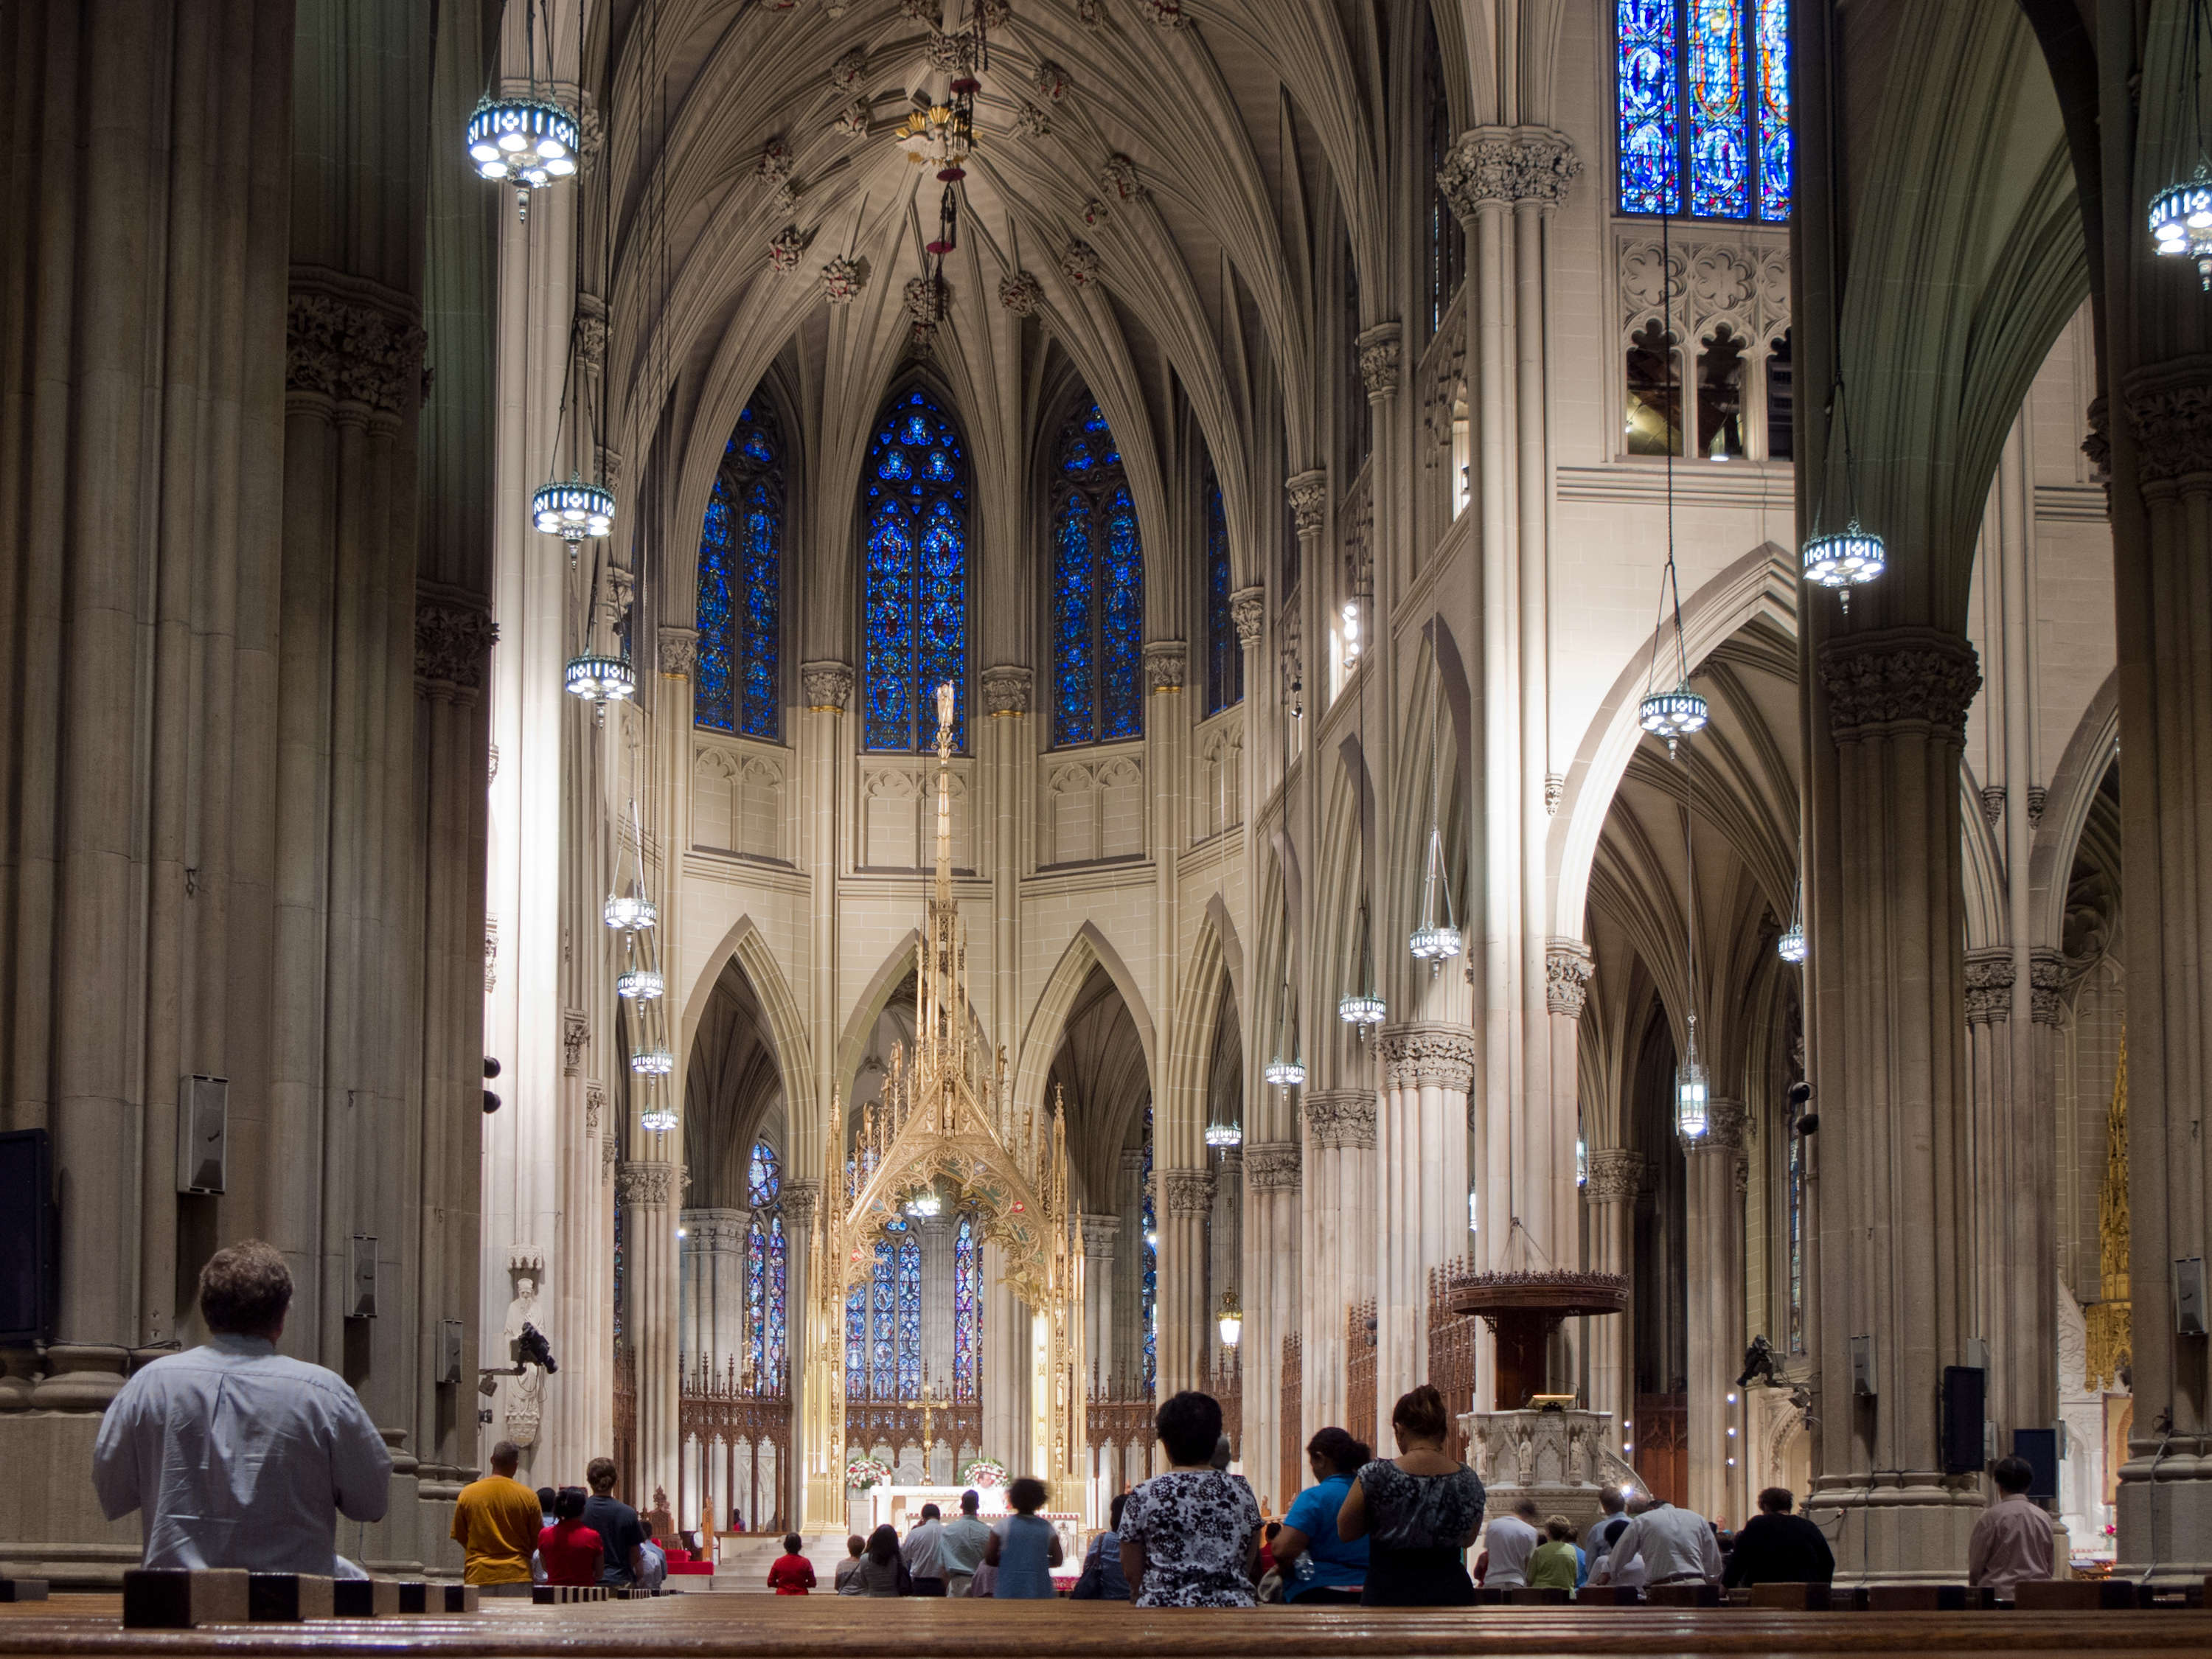 File:St. Patrick's Cathedral - New York - 01.jpg - Wikimedia Commons